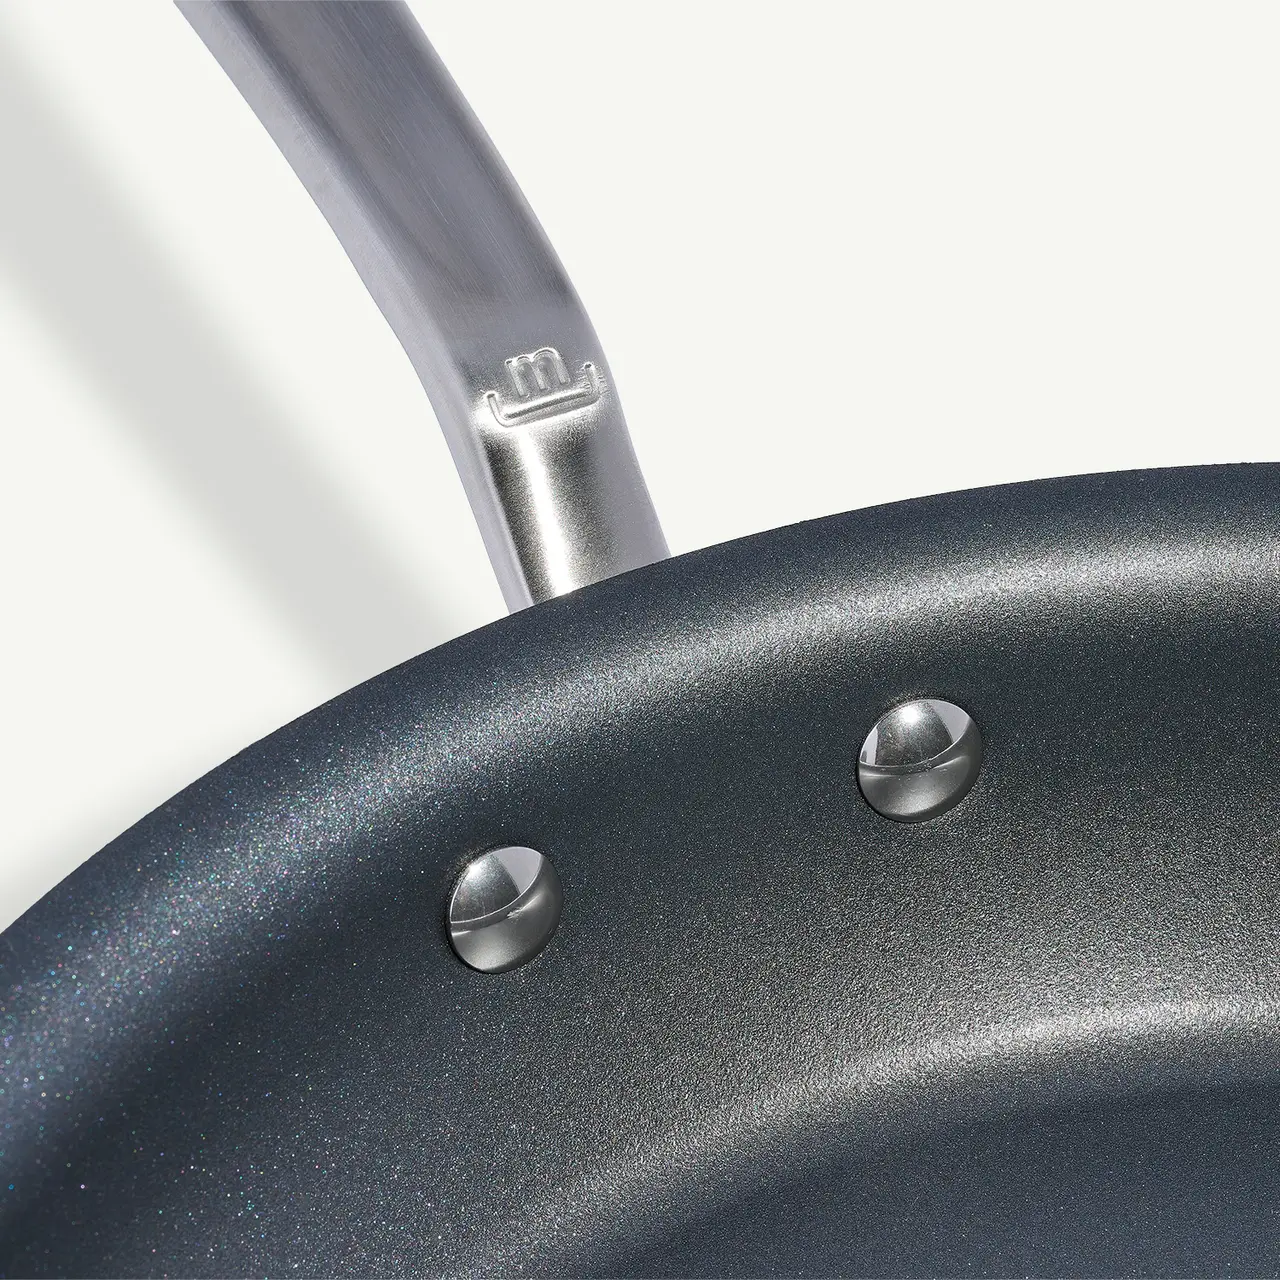 A close-up of a non-stick frying pan with its metallic handle visible, highlighting two rivets attaching the handle to the pan.